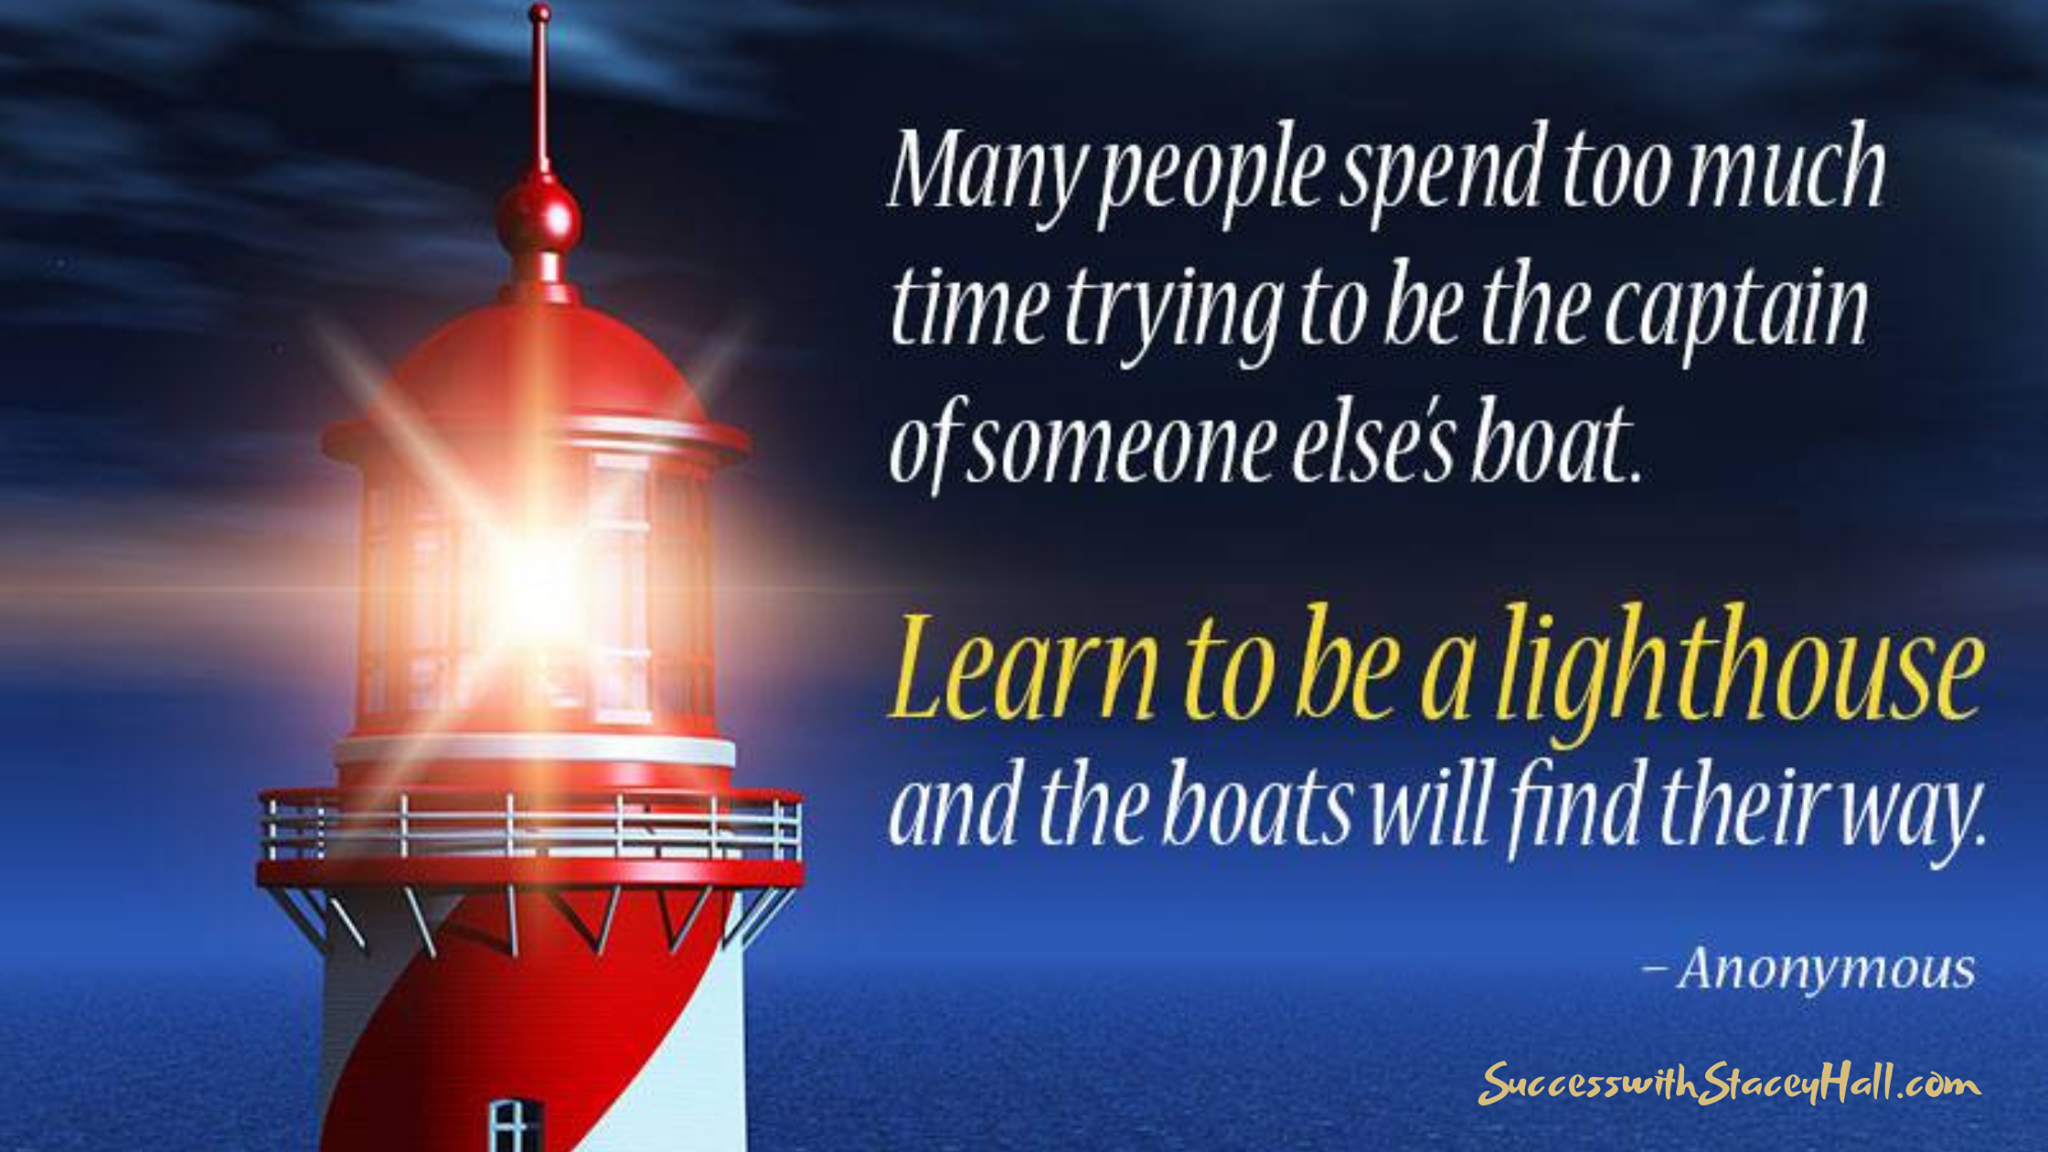 Learn to be a lighthouse